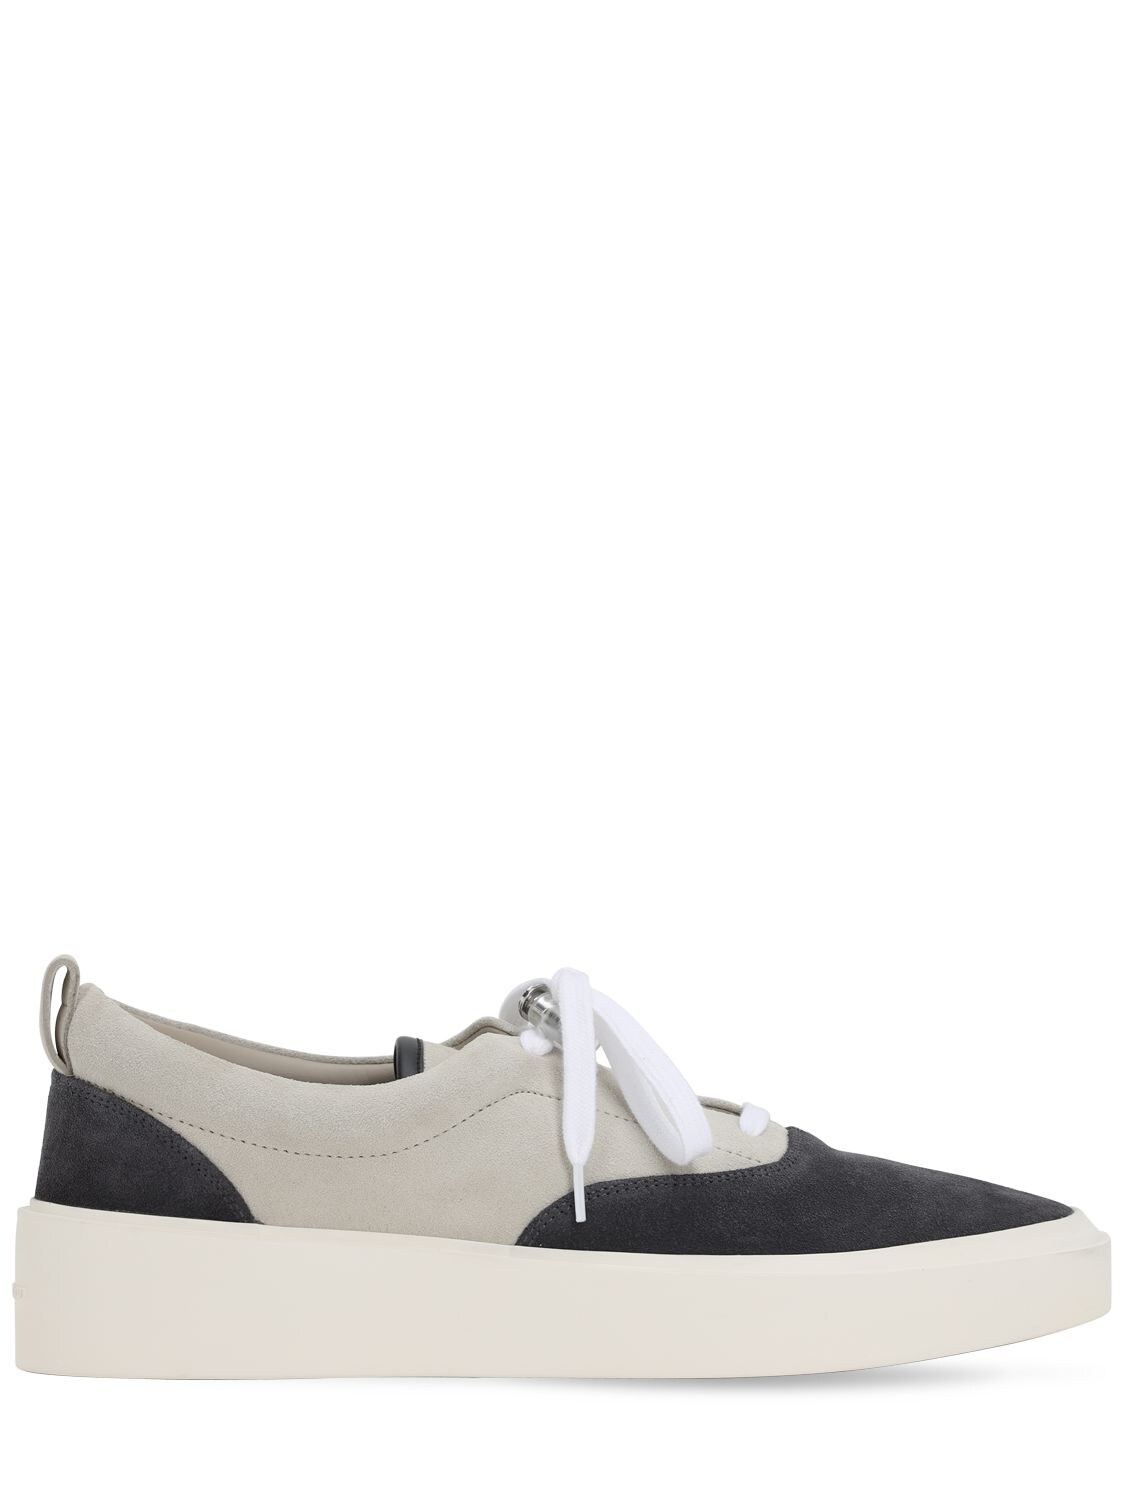 FEAR OF GOD 101 LACE-UP LEATHER SNEAKERS,70IWC7002-NJKW0